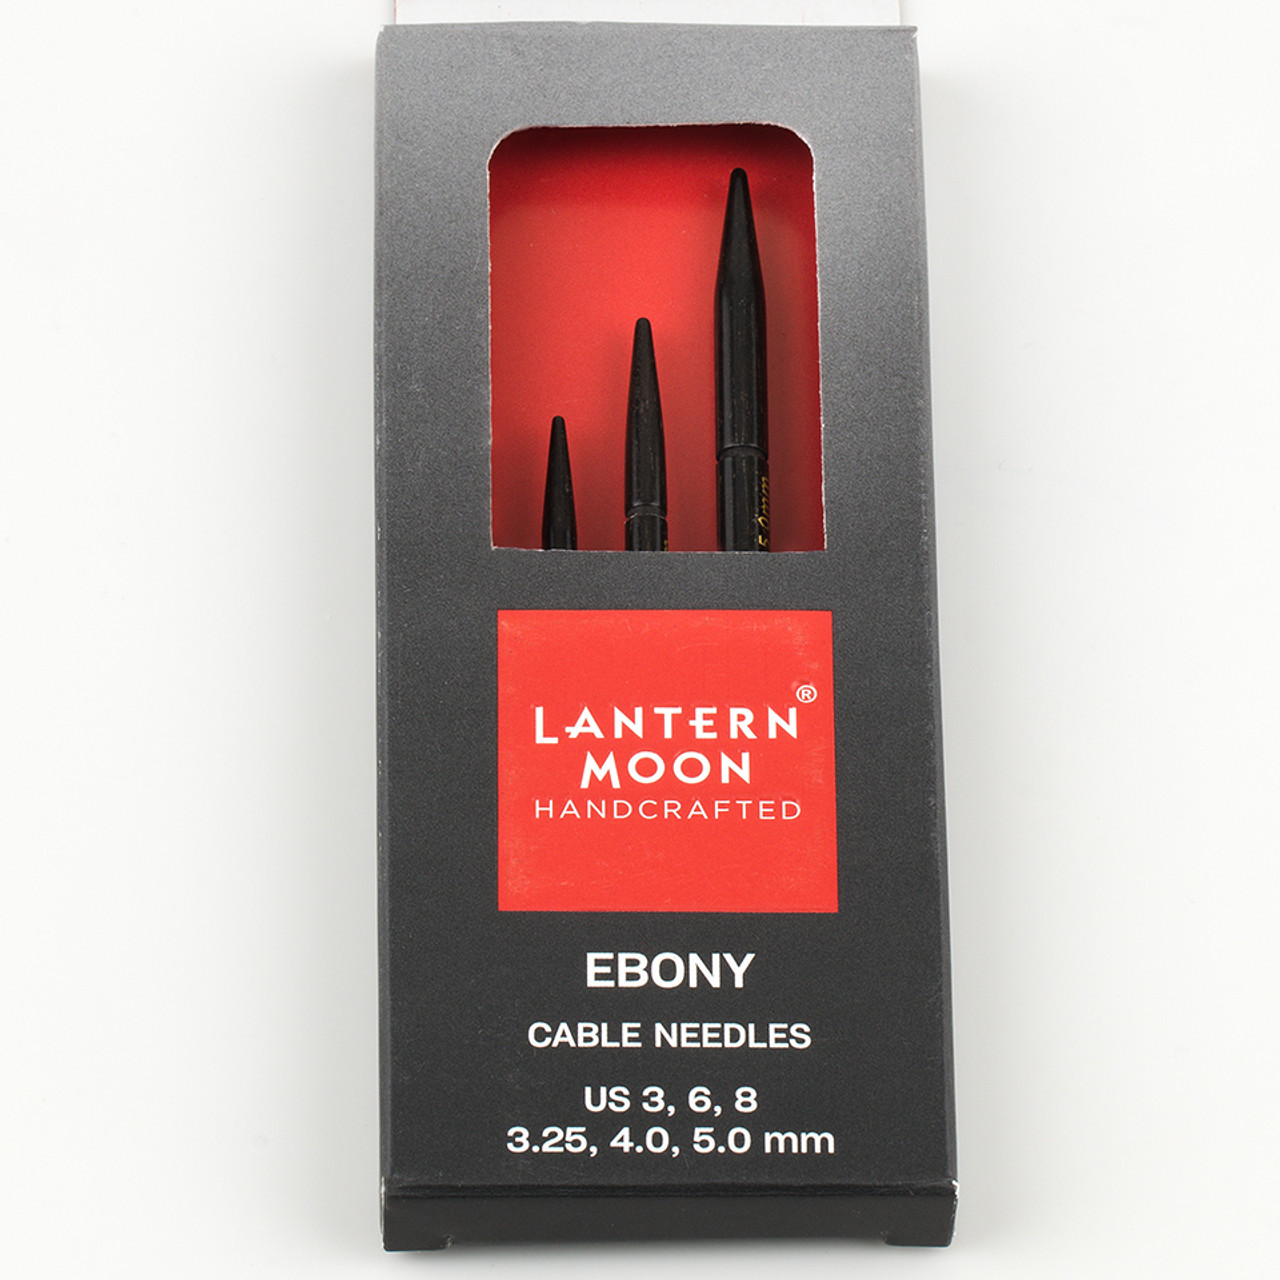 Lantern Moon Cable Needles -3 pack